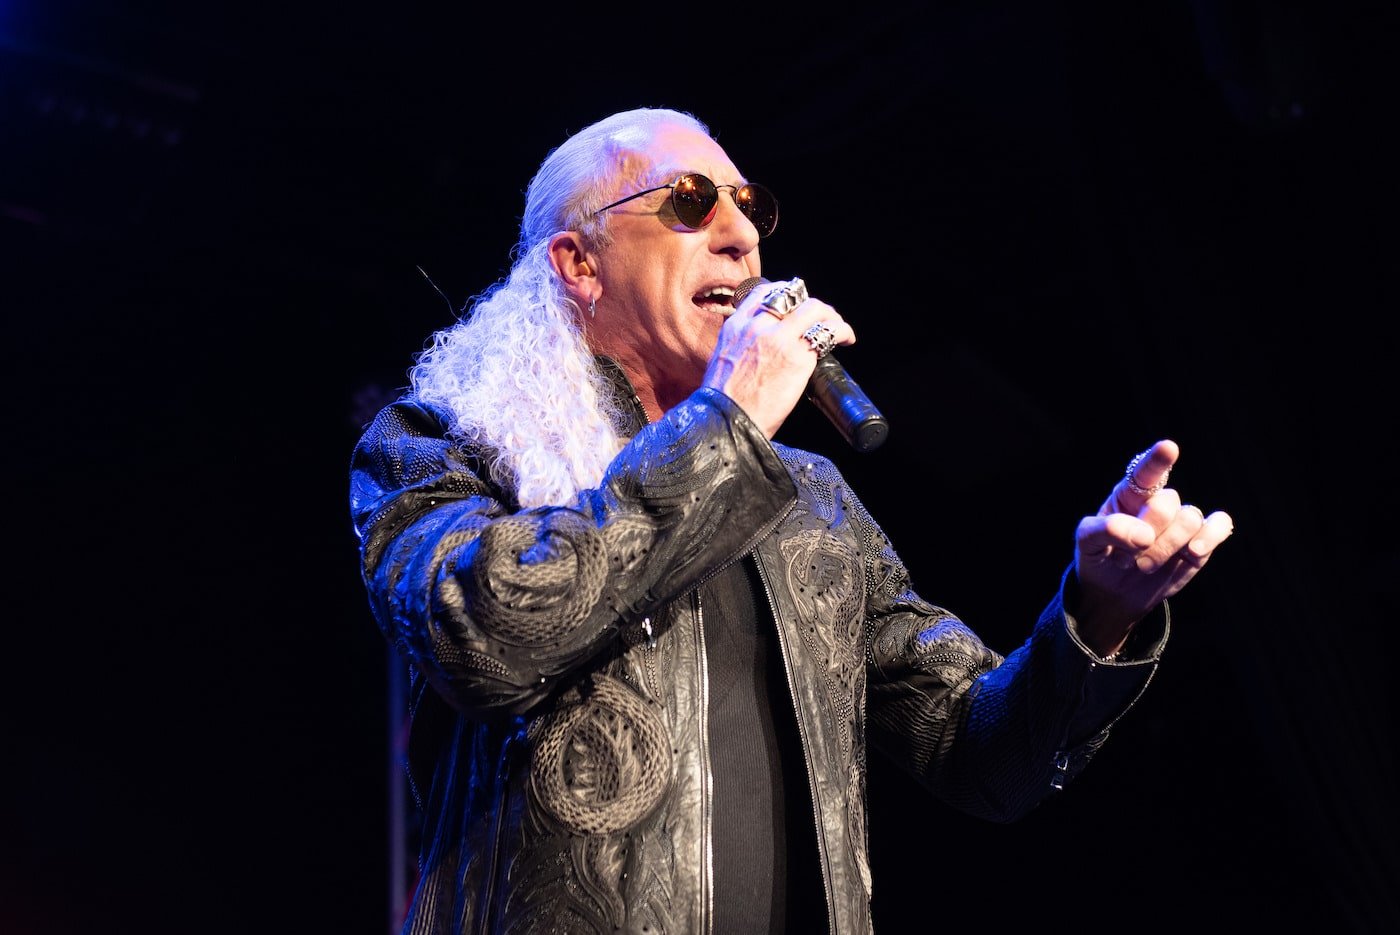 Dee Snider from Twisted Sister performs